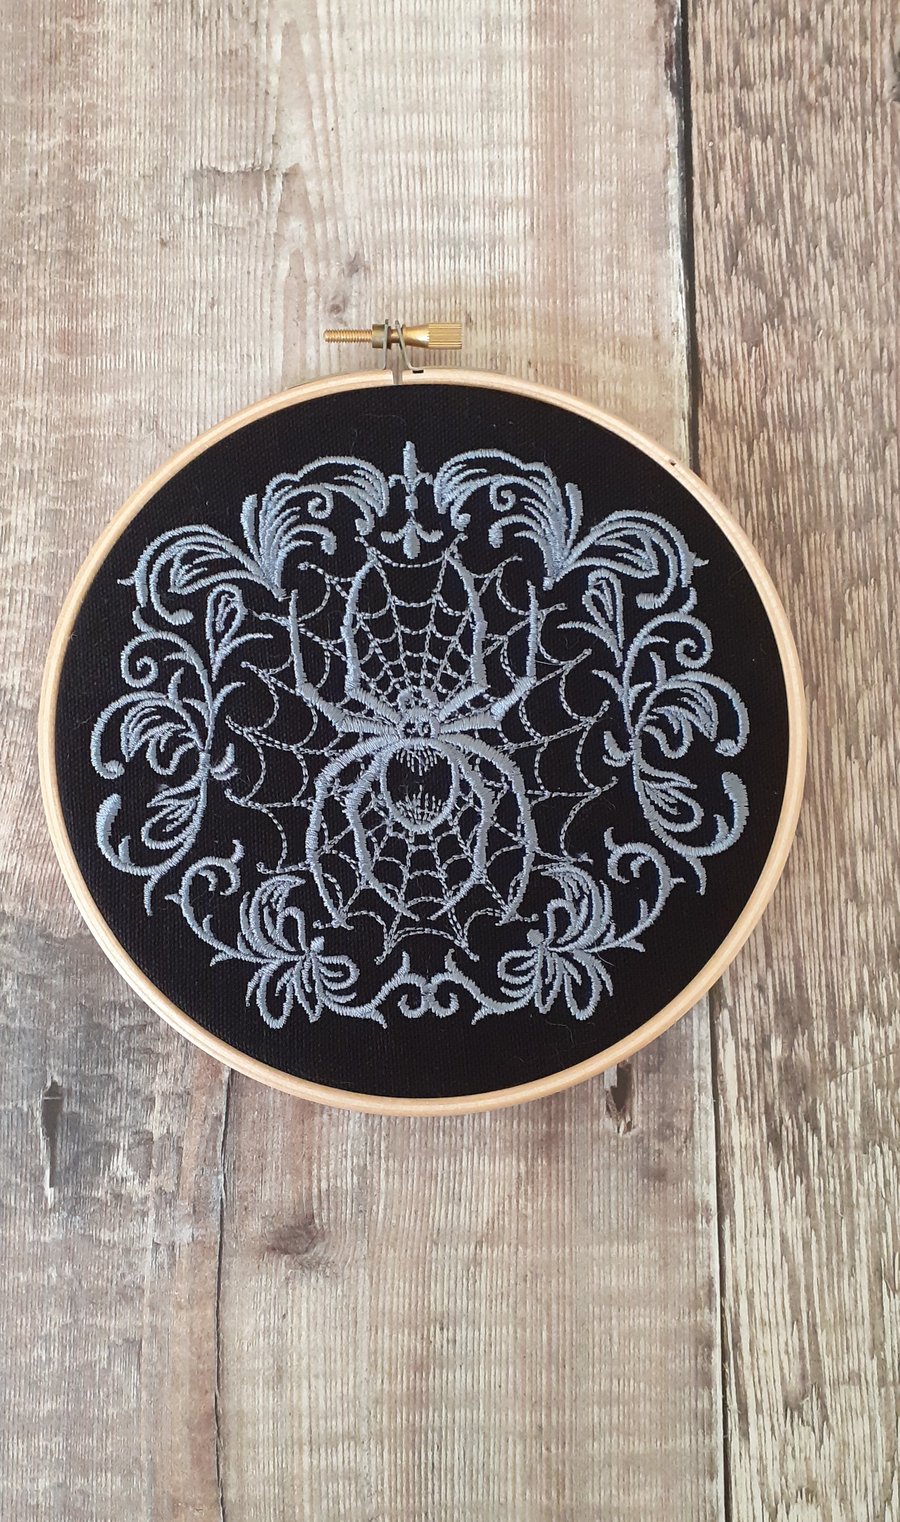 Spider web embroidery hoop, Halloween decoration